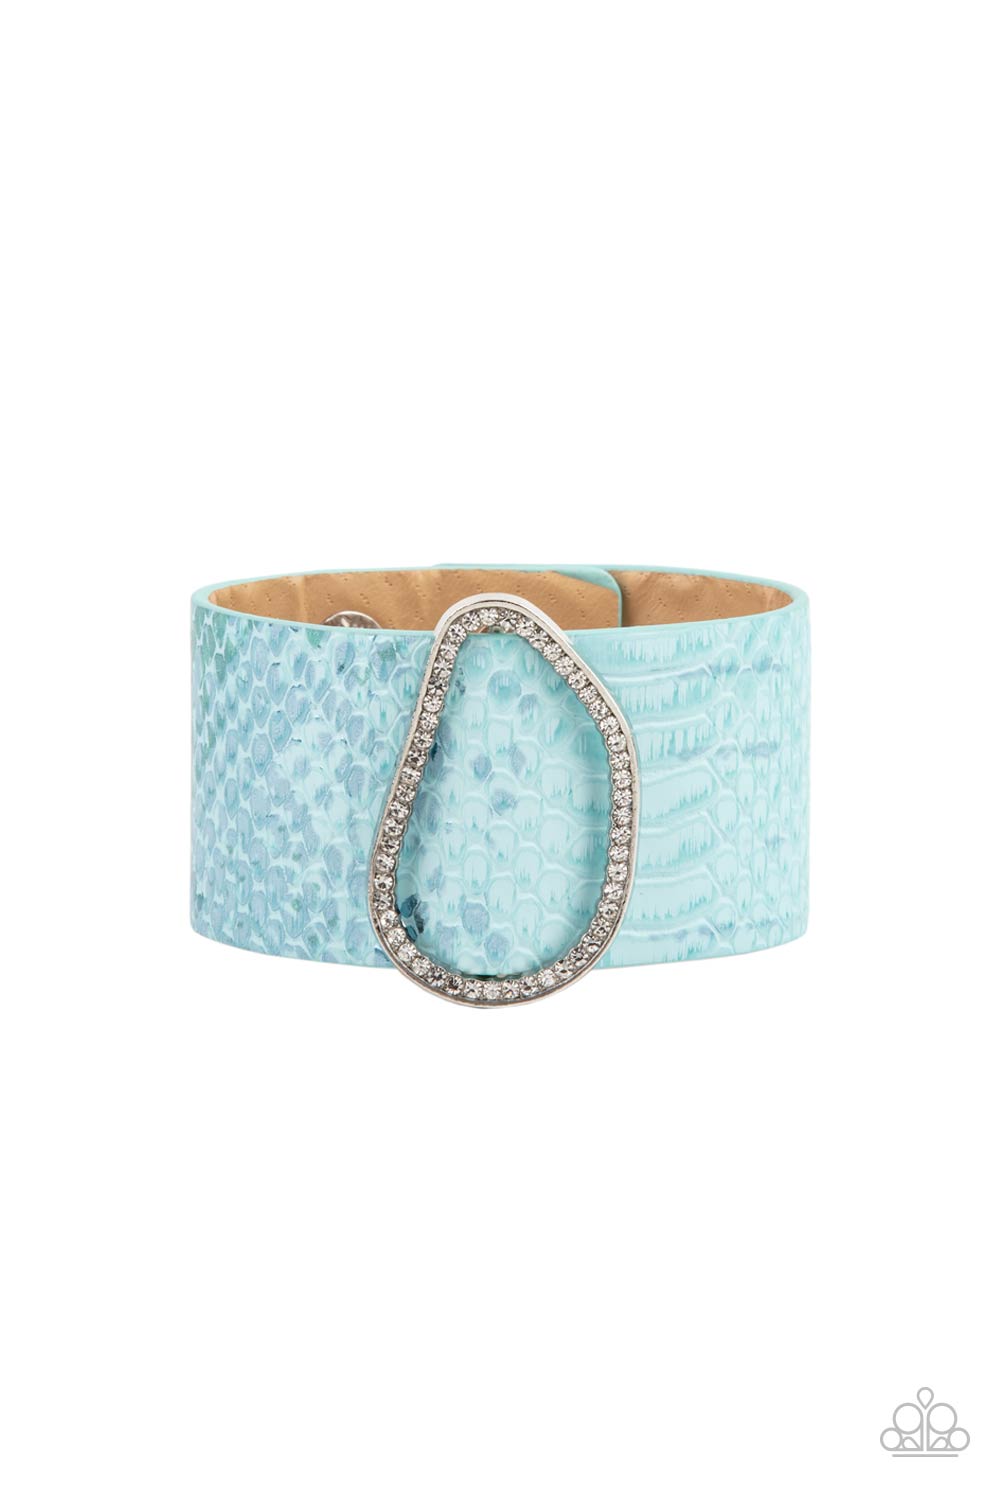 HISS-tory In The Making - Blue bracelet A010